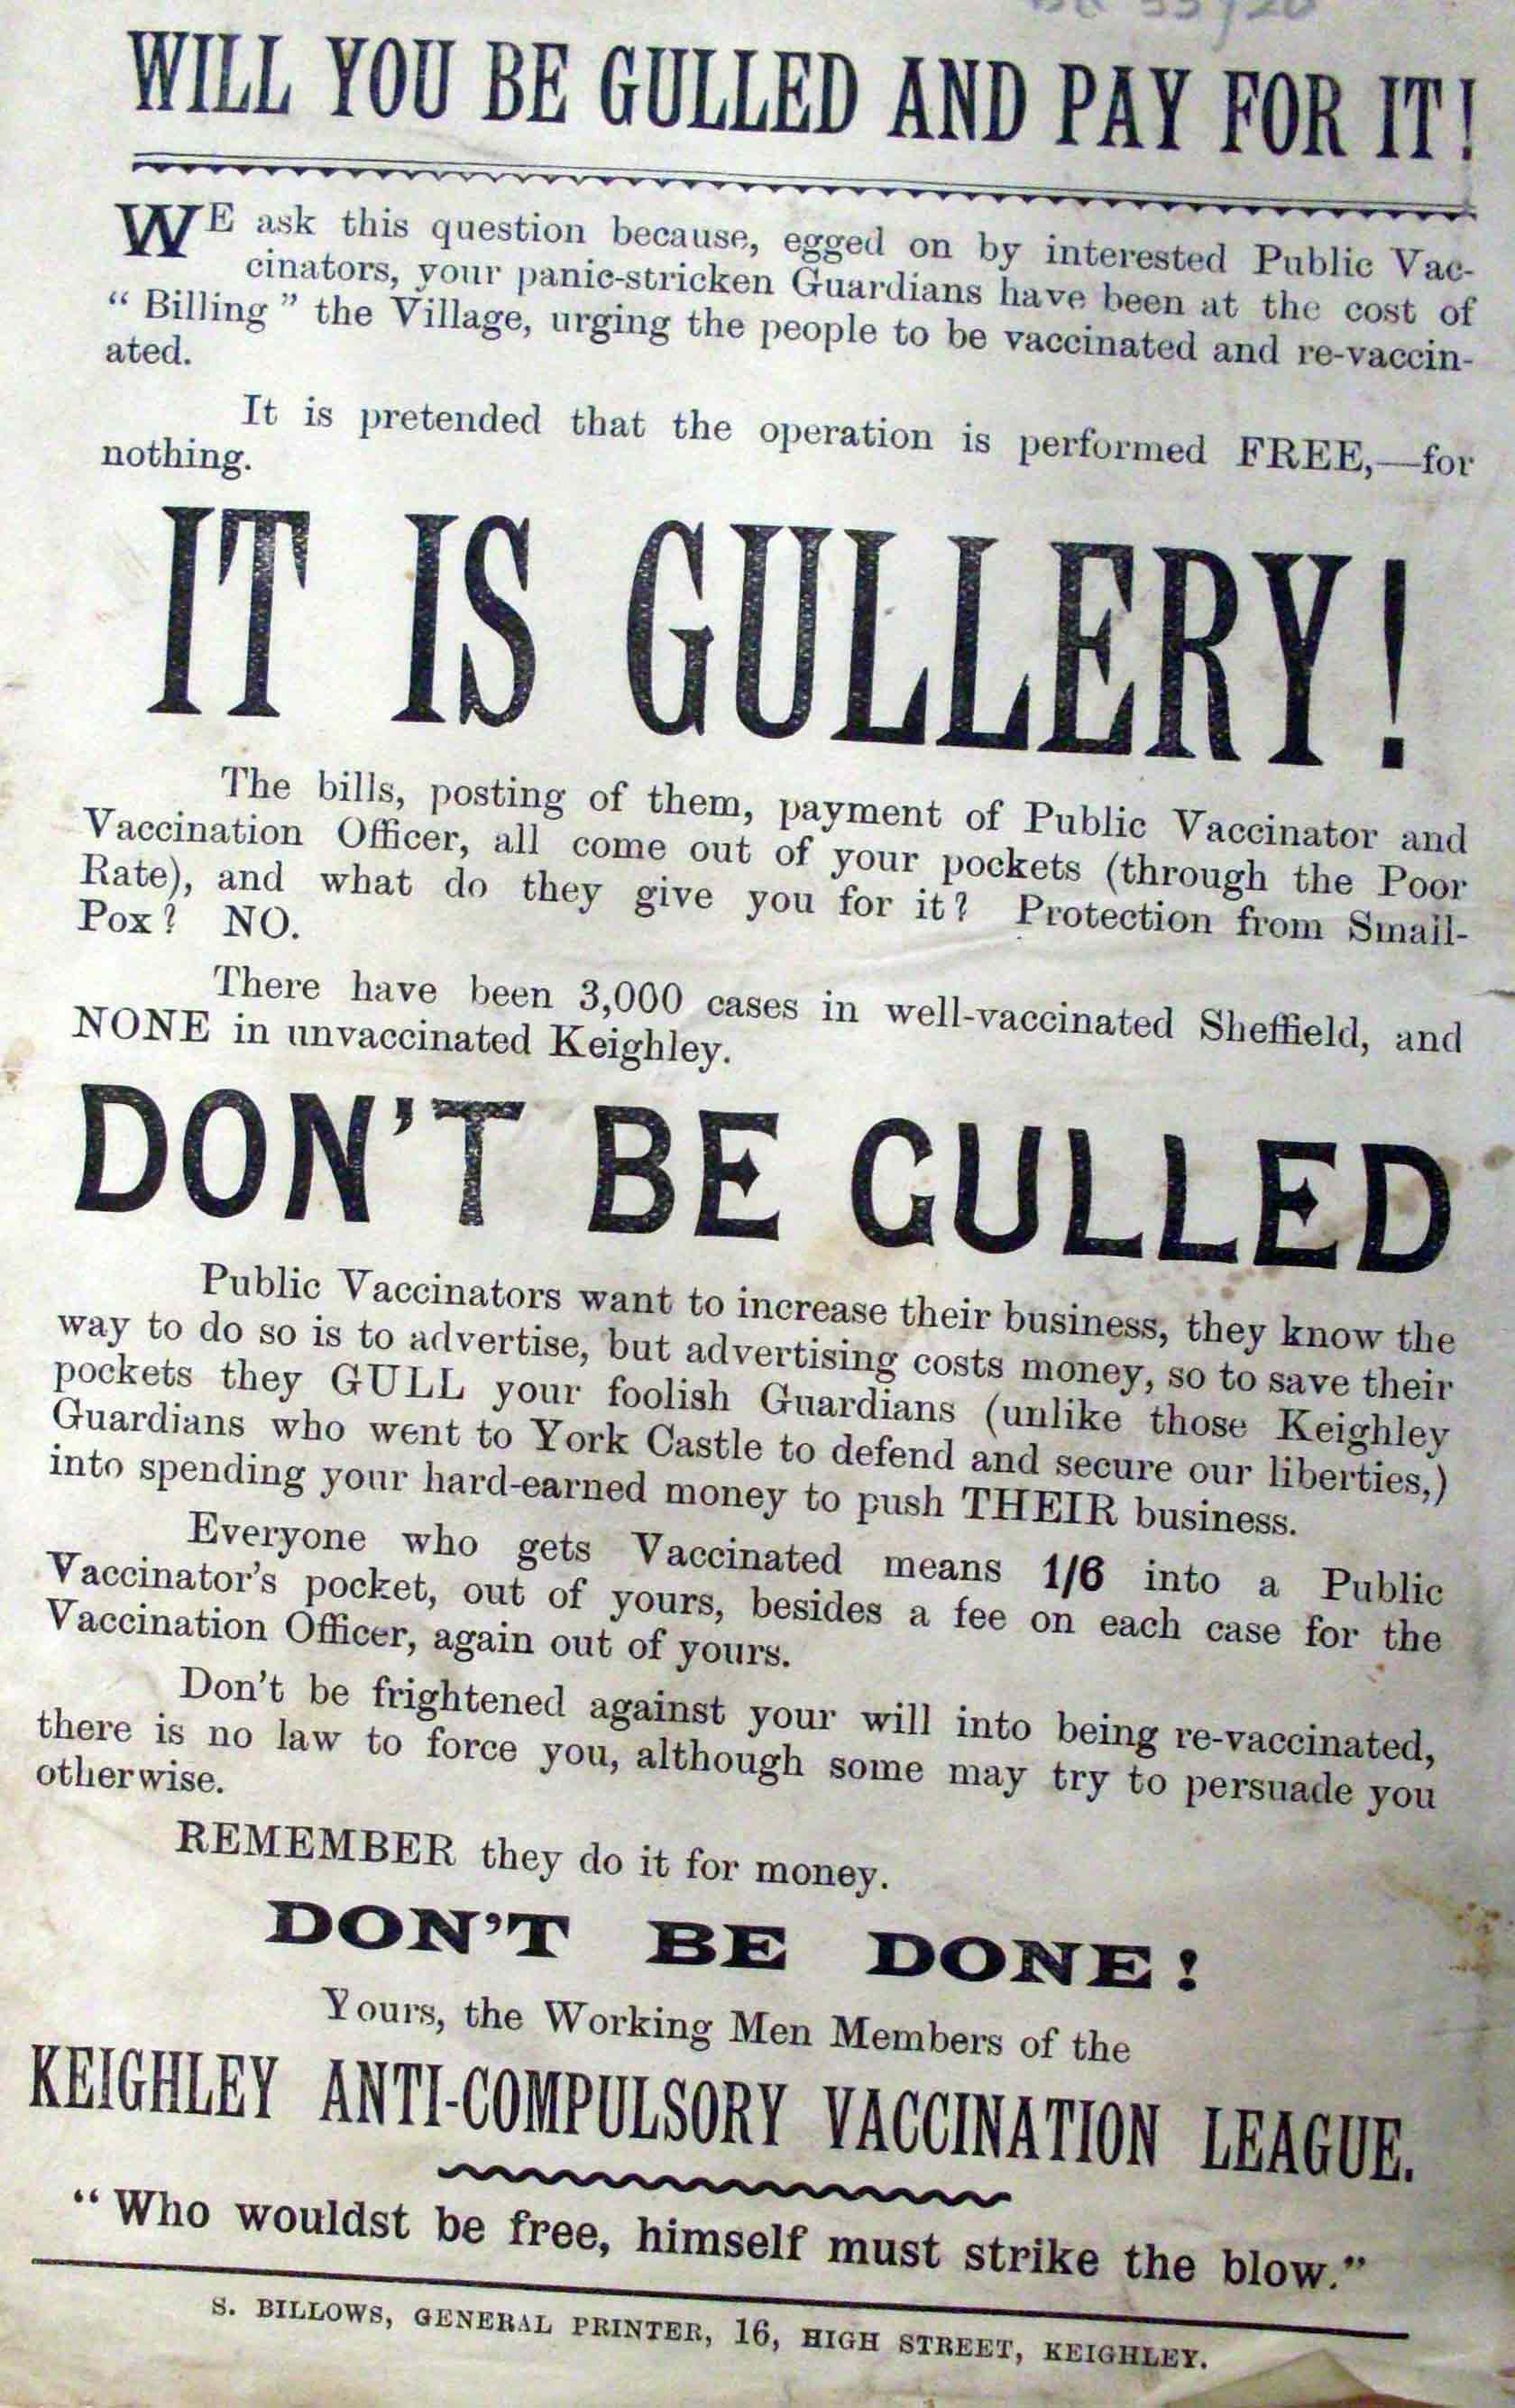 A poster from the Yorkshire Anti-Compulsory Vaccination League